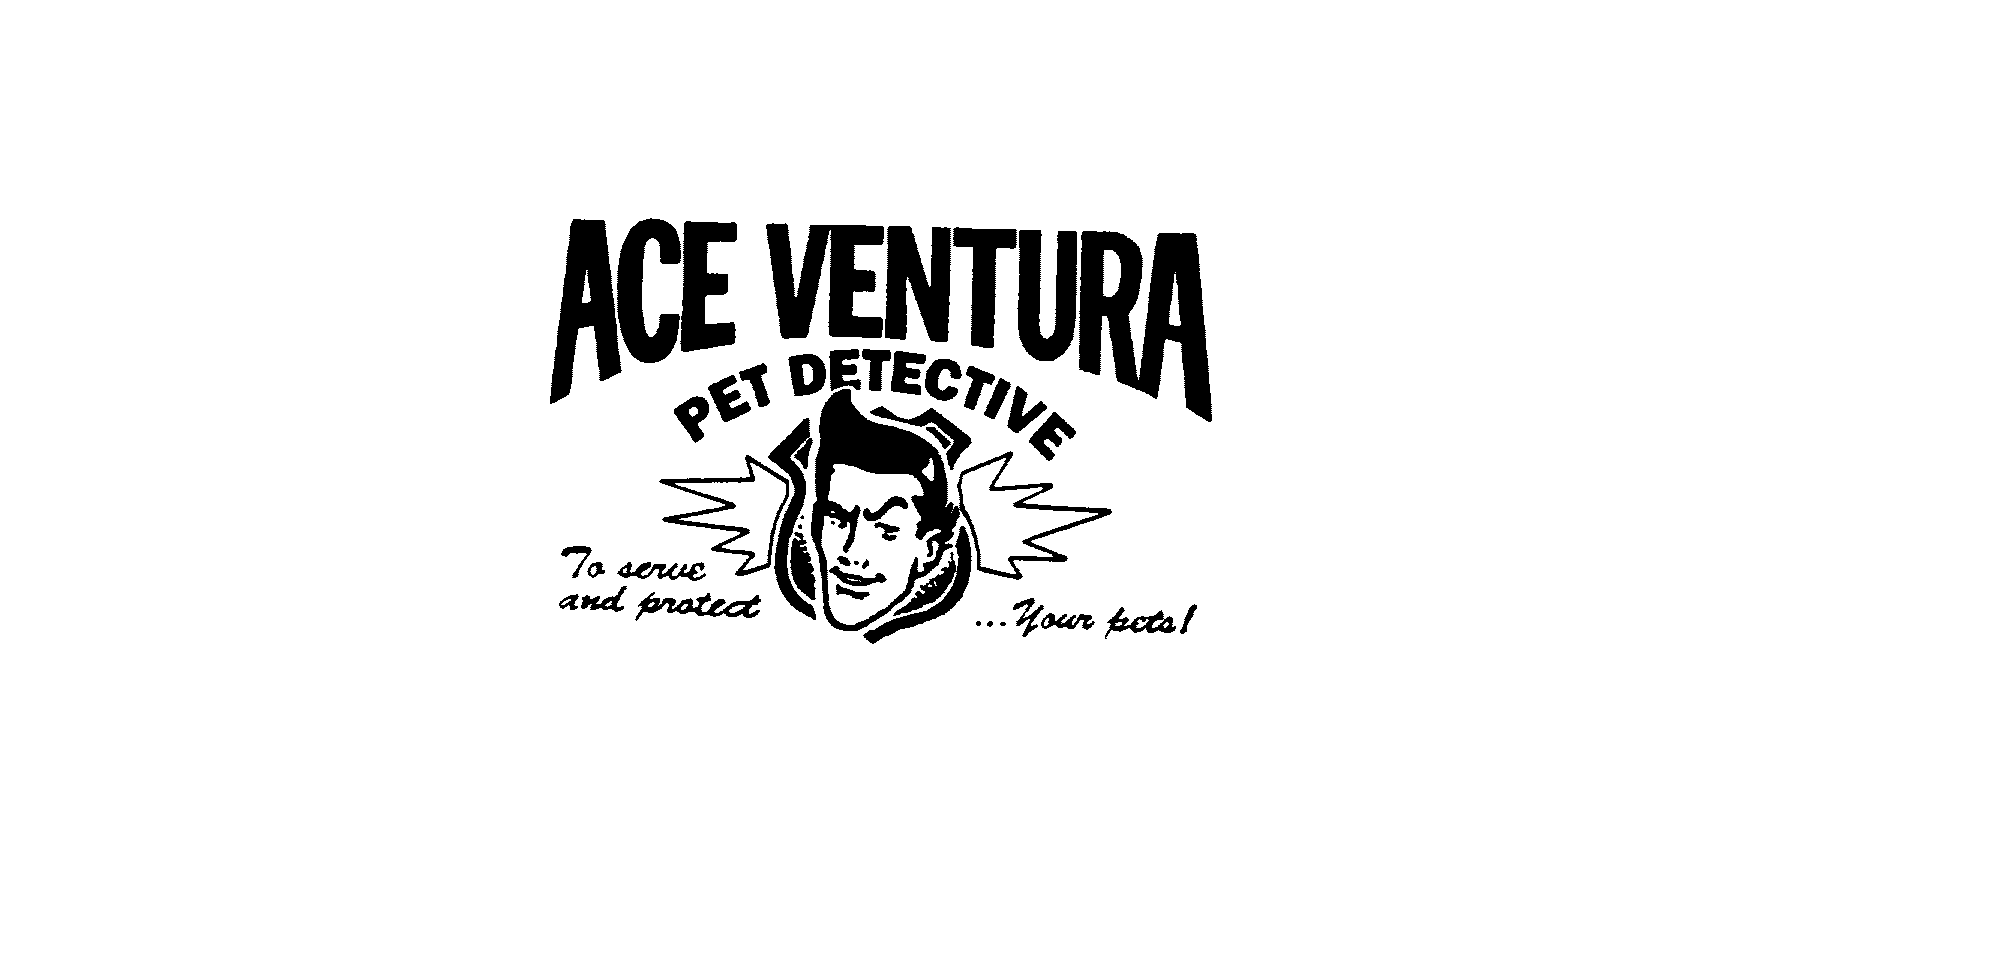  ACE VENTURA PET DETECTIVE TO SERVE AND PROTECT YOUR PETS